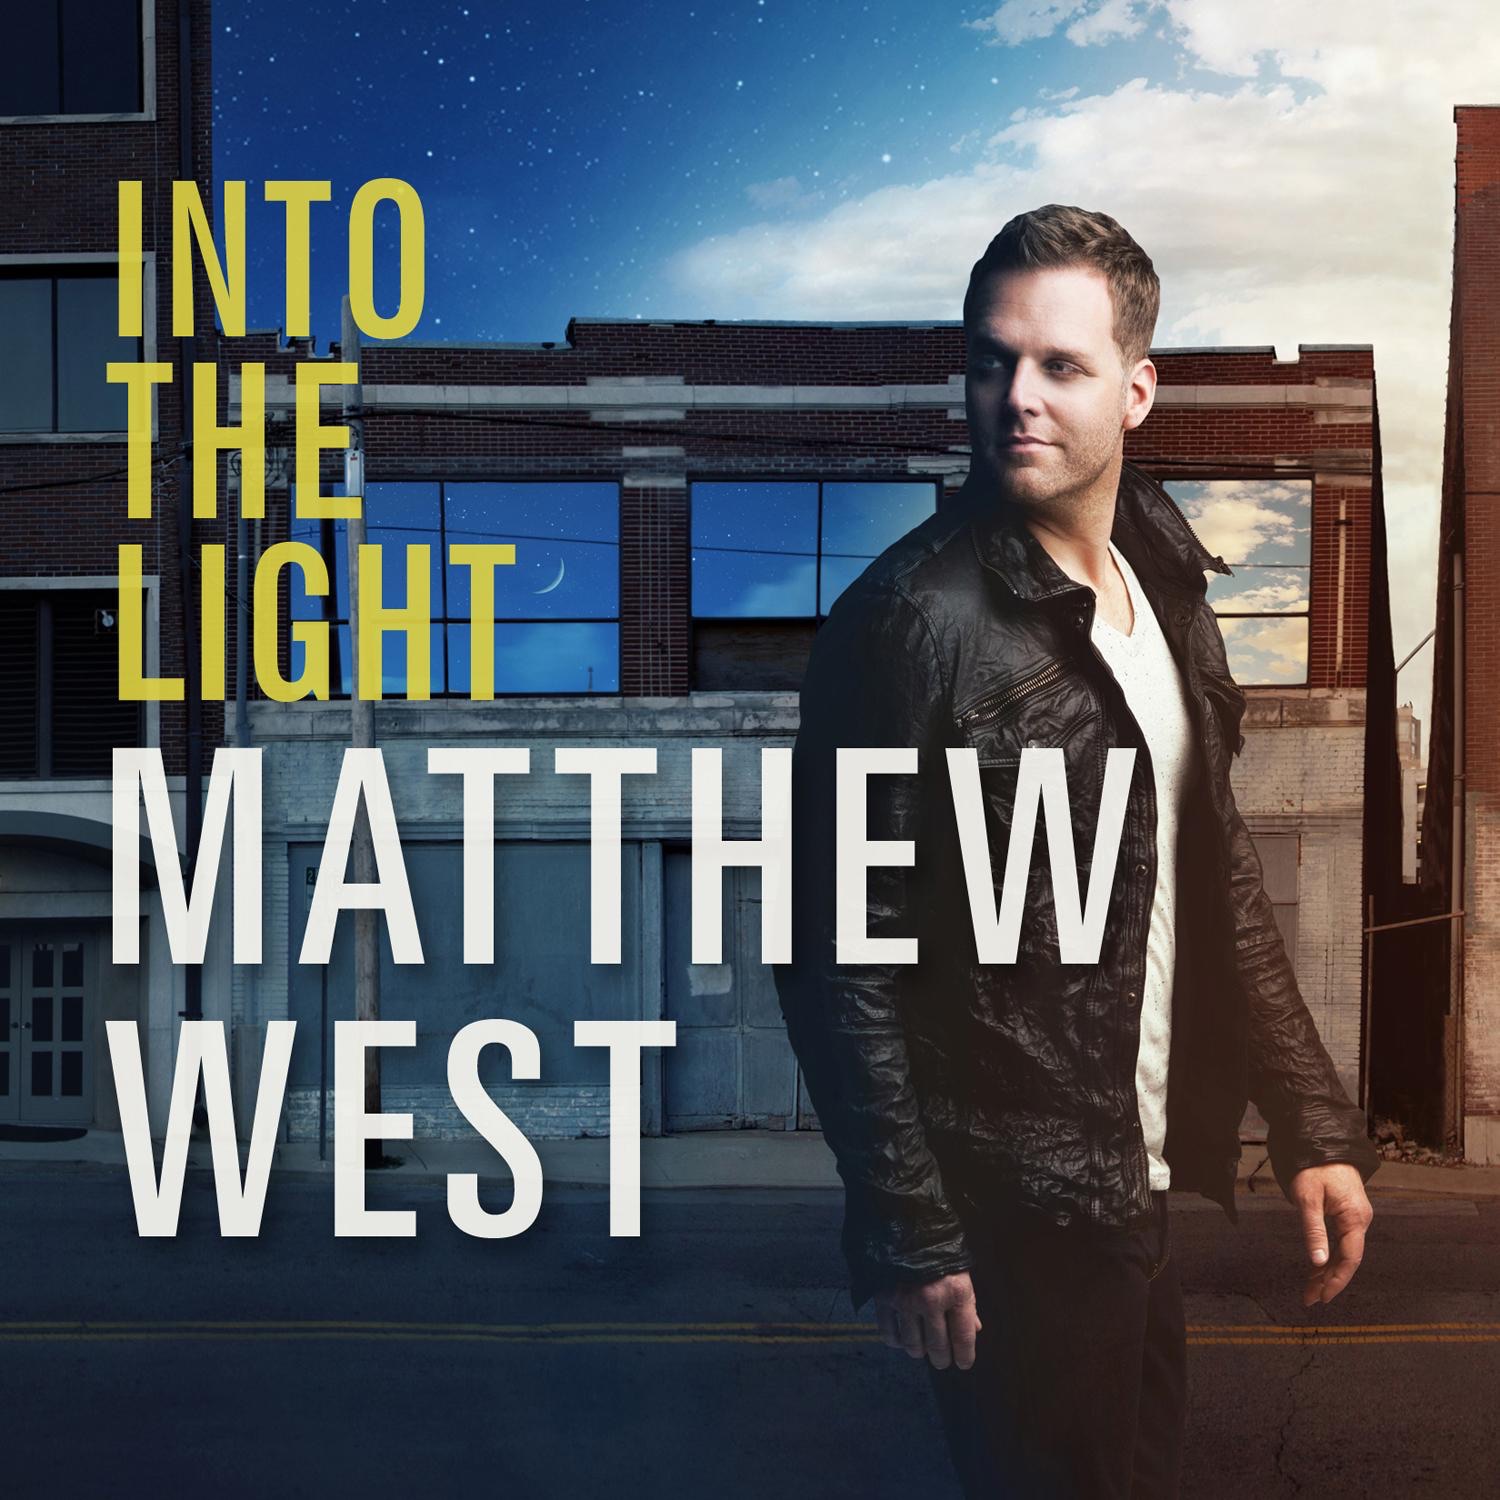 Art for Hello, My Name Is by Matthew West